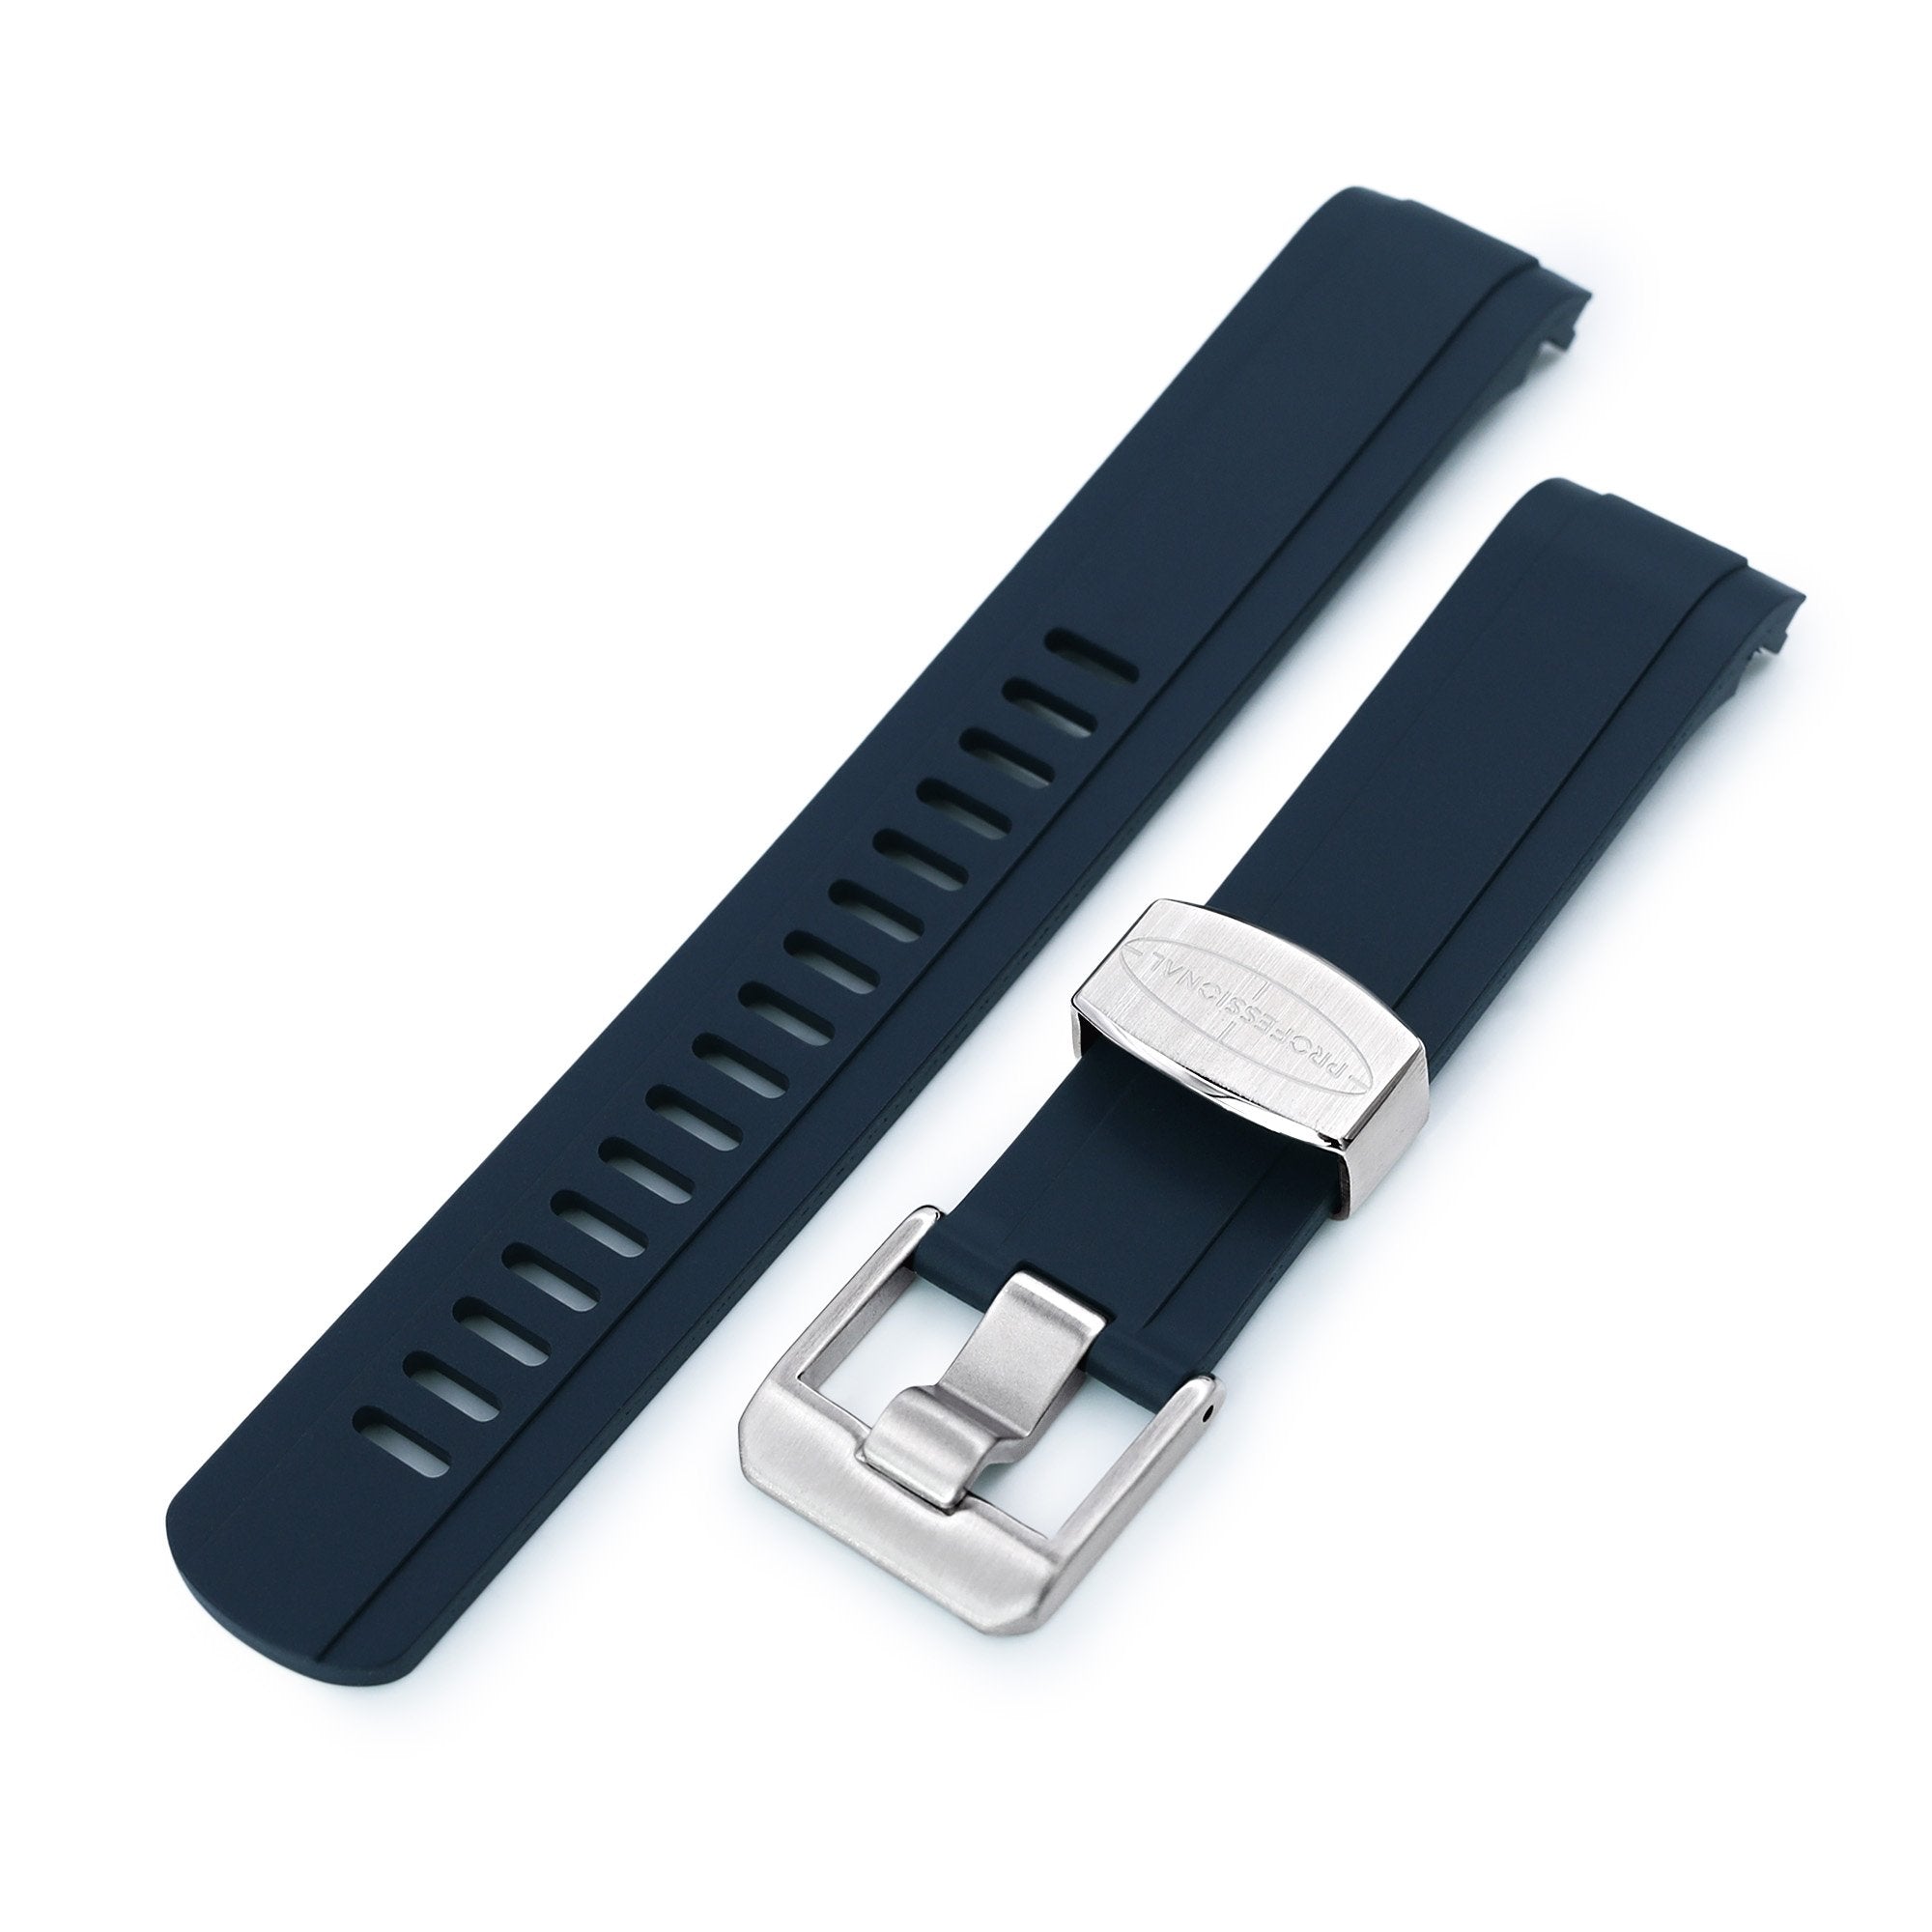 20mm Crafter Blue - Dark Blue Rubber Curved Lug Watch Strap for Seiko Baby MM200 & Mini Turtles Strapcode Watch Bands